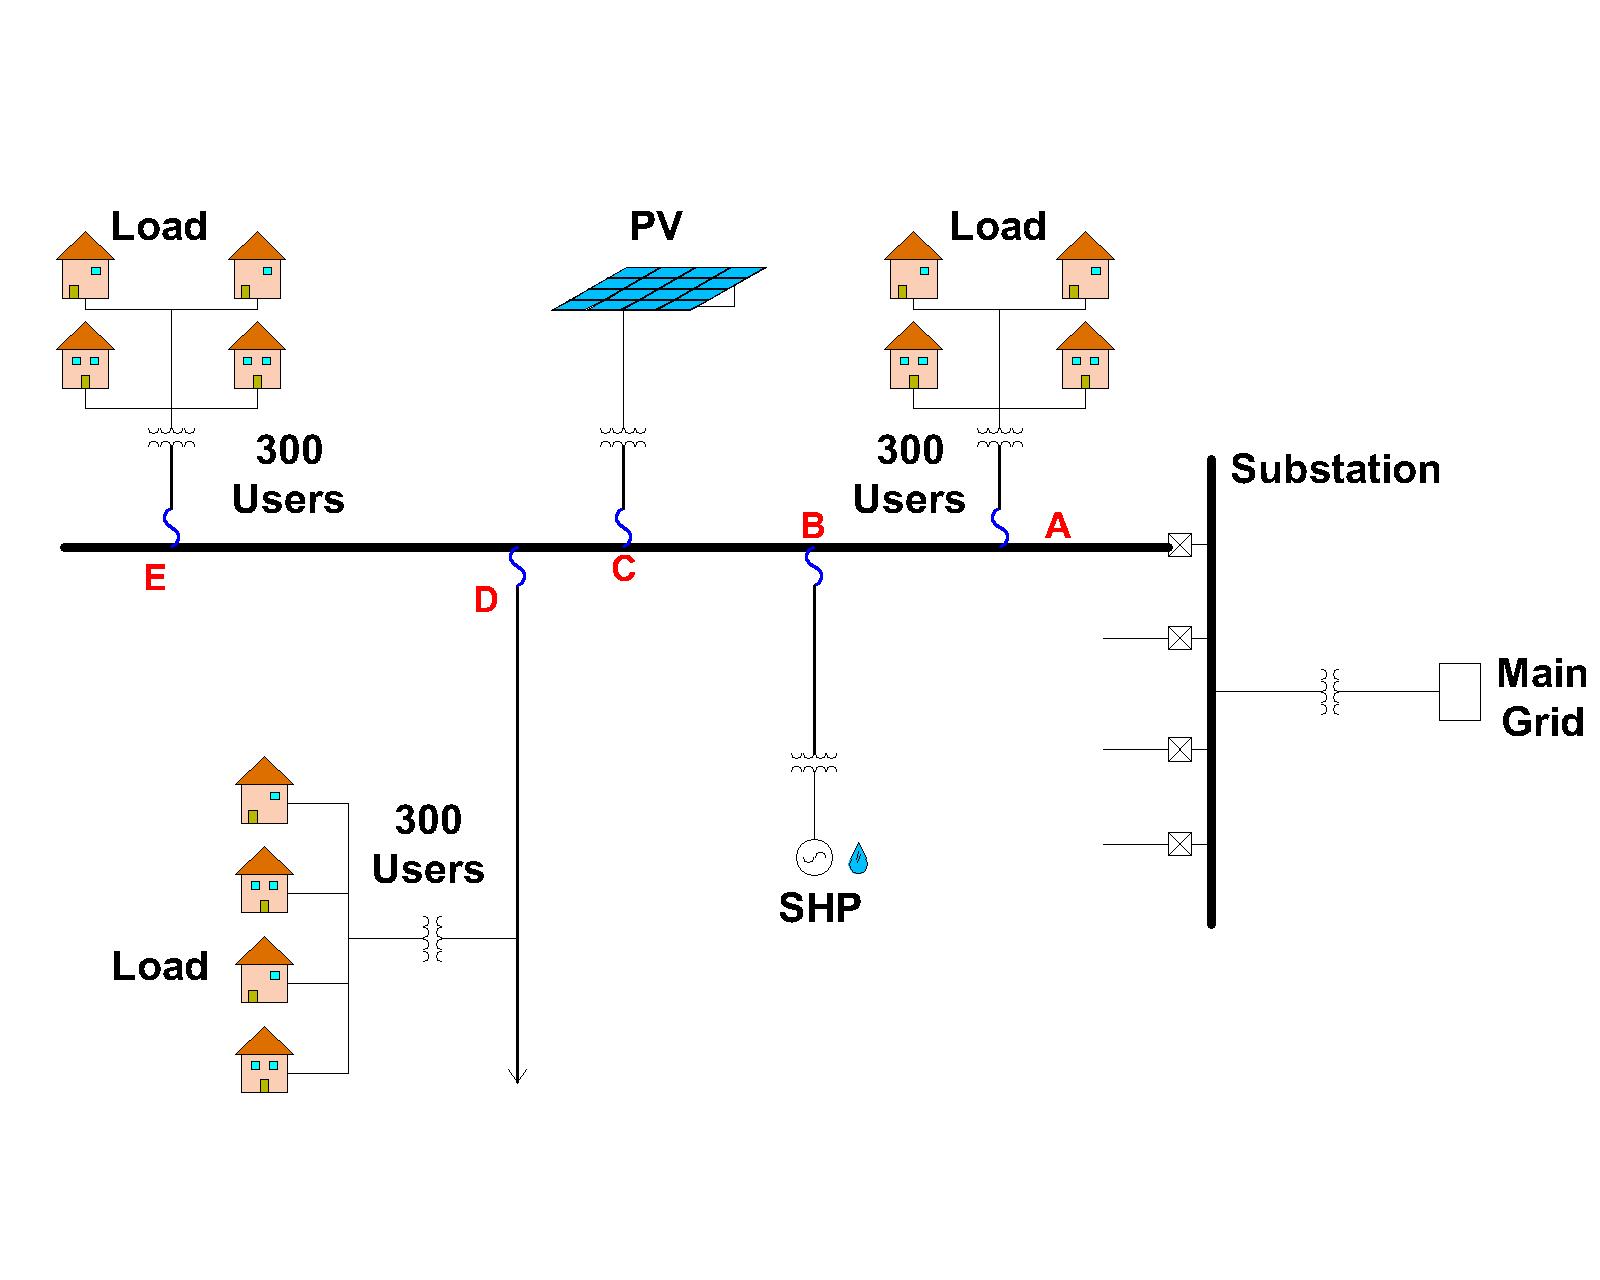 Faults simulation on points A, B and C in a typical distribution system with
distributed generation.